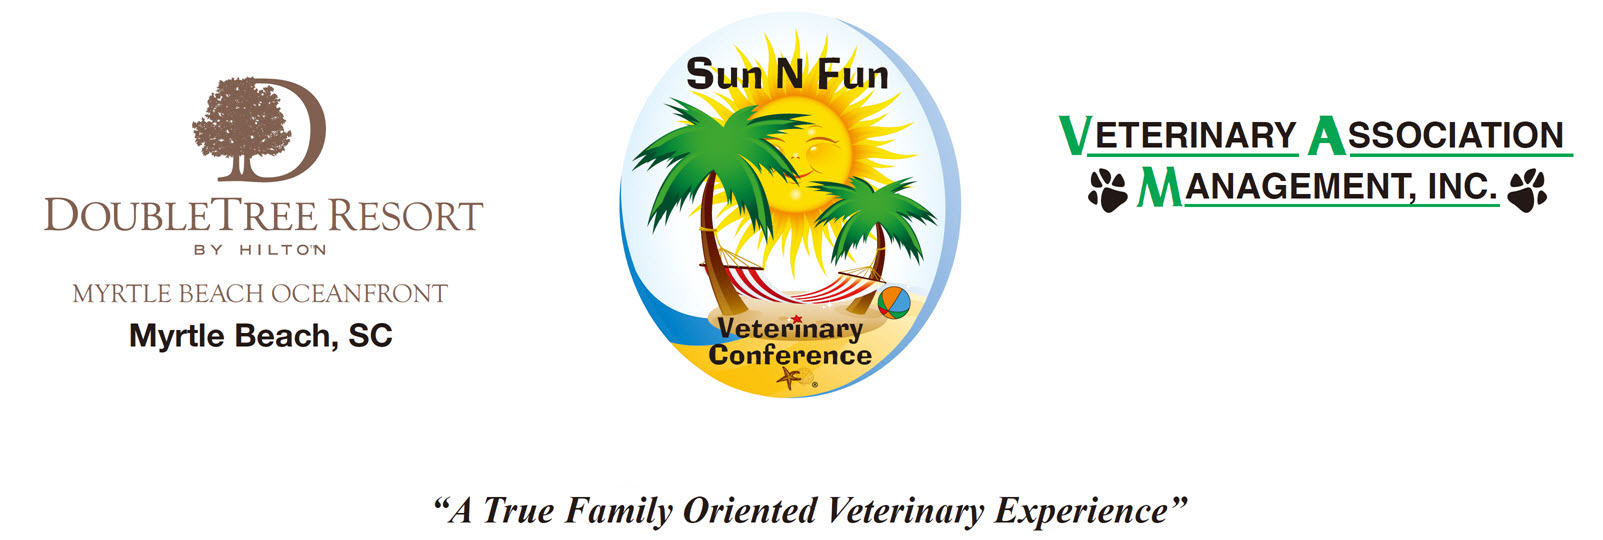 Sun N Fun Veterinary ConferenceAugust 11-14, 2019 A True Family Oriented Veterinary Experience SCHEDULED SPEAKERS: Michael Rossi, DVM, MNS, DACVD, Sponsored by Ceva Animal Health Cutaneous adverse food reactions in the canine patient; Feline hypersensitivity dermatitis; Diagnostic sampling of the dermatology patient; Microbial biofilm: a major contributor to resilient infections; Jeff Mayo, DVM-Surgical Approaches to the Long Bones for Fracture Repair; Cardiovascular Exams - Pre-op to Surgery; Regenerative Medicine Topics: Stem Cells, PRP; Autologous Vaccines - what do they all mean; Nicole LaForest, LVT, RVT, CCFT, Sponsored by Pet Emergency Education Session 1 - Canine and Feline CPR & First Aid Class; Canine and Feline CPR and Advanced Life Support Class $90 charge includes certification wallet card, an official certificate, 3 RACE approved CEU, an ebook copy of our interactive reference guide and a 2 year subscription of our online emergency resource center; David Bradley, DVM, FASLMS, Sponsored by Summus Medical Laser: Keys to Clinical and Economic Success; We know laser therapy works. Let’s look at how to get the best results from your laser both clinically and economically; Nicole LaForest, LVT, RVT, CCFT, Sponsored by KVP Common Orthopedic Injuries in Small Animals and How we can Best Provide Patient Advocacy at all price points Customized Orthotics for Small Animals; Pulse Electromagnetic Frequency Therapy (PEMF) The Science behind the “Voodoo”; Jeff Mayo, DVM-Lumps, Bumps and other things with energized surgical instruments; ADVANCED techniques in Fracture Fixation, what’s the latest? Fracture Repair Lab - hands on experience with Osteocertus; NEW Locking plate fixation technology; Bonnie Bragdon-Managing Up: Getting your Boss to Behave; Liquid Biopsy: The Future of Managing Cancer Patients; Pathogen Fingerprints: Use of Raman Spectroscopy in Clinical Diagnostics; The In-House Lab: Analytical & Clinical Accuracy; The In-House Lab: Pricing & Profitability; Salina Locke, DVM-Exotics for the Small Animal Practitioner; Pet Birds What You Need to Know; How I Treat Reptile and Amphibian Diseases; GI Stasis Syndrome in Small Herbivores; Acquired Dental Disease of Rabbits and Rodents; Tips for Treating Ferrets, Rabbits and Rodents; Paul Camilo, CVPM- Growing Your Dental Department; Communicating Dentistry Like a Pro; Finding, Treating & Charging for Dental Pathology; WOWing Dental Clients; How to Make Your Best Medicine The Best Option; Veterinary Technology to Make Your Lives Easier; Michelle Shine, PhD-The Endocannabinoid System; Melissa Lee Clark-How to find good products, the company story, and methods of application; Andrew Capps-FDA and State Regulations; Davis Collins, CBD and drug interactions